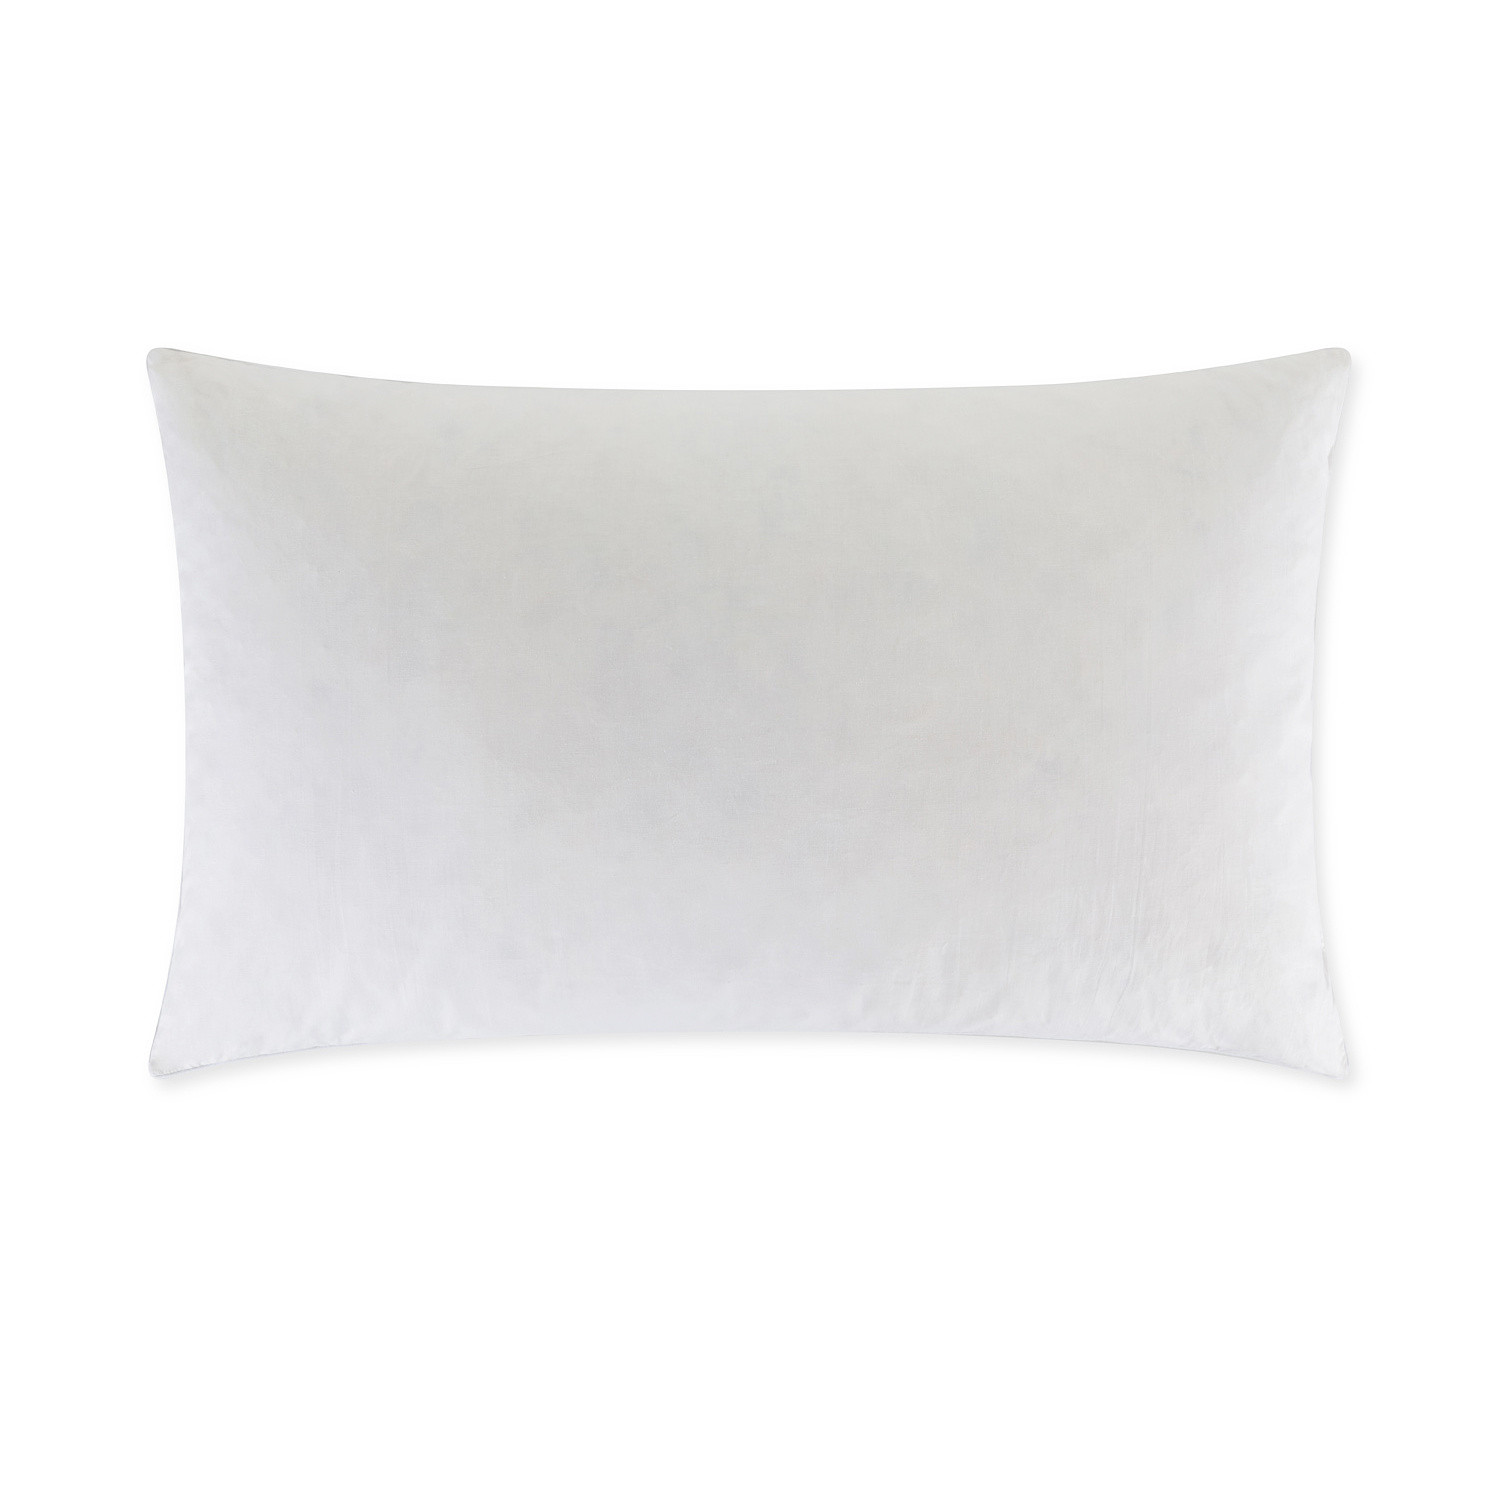 Cotton pillow with feather padding, White, large image number 0